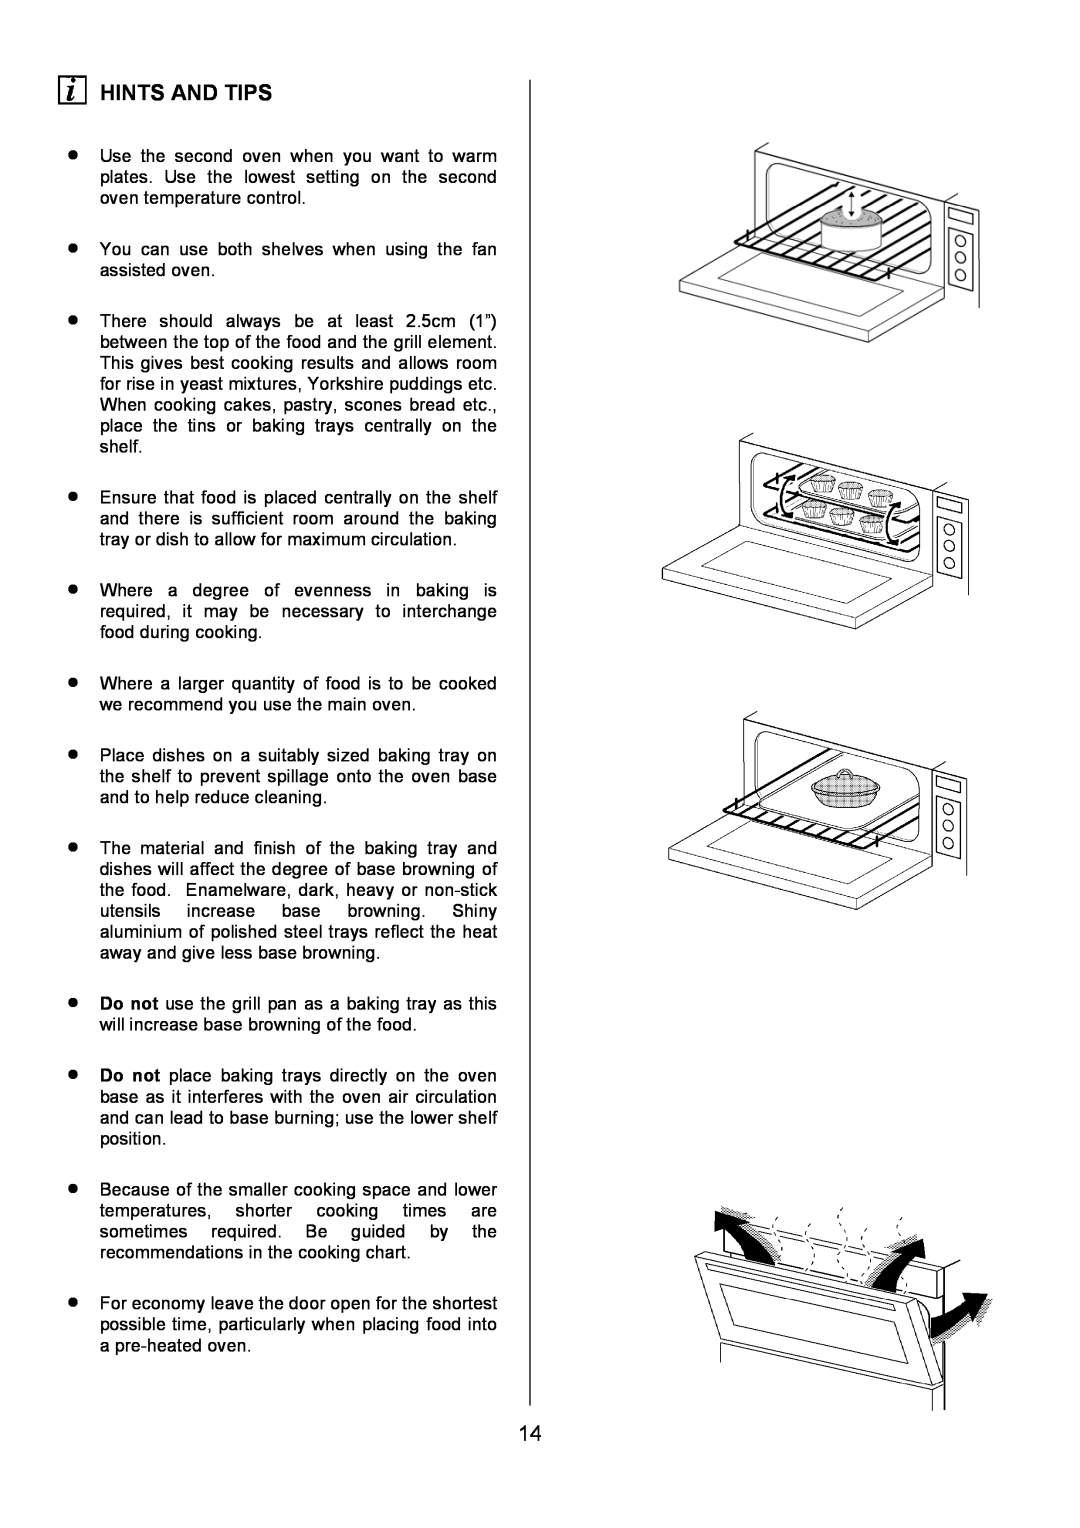 Electrolux U7101-4 operating instructions Hints And Tips, You can use both shelves when using the fan assisted oven 